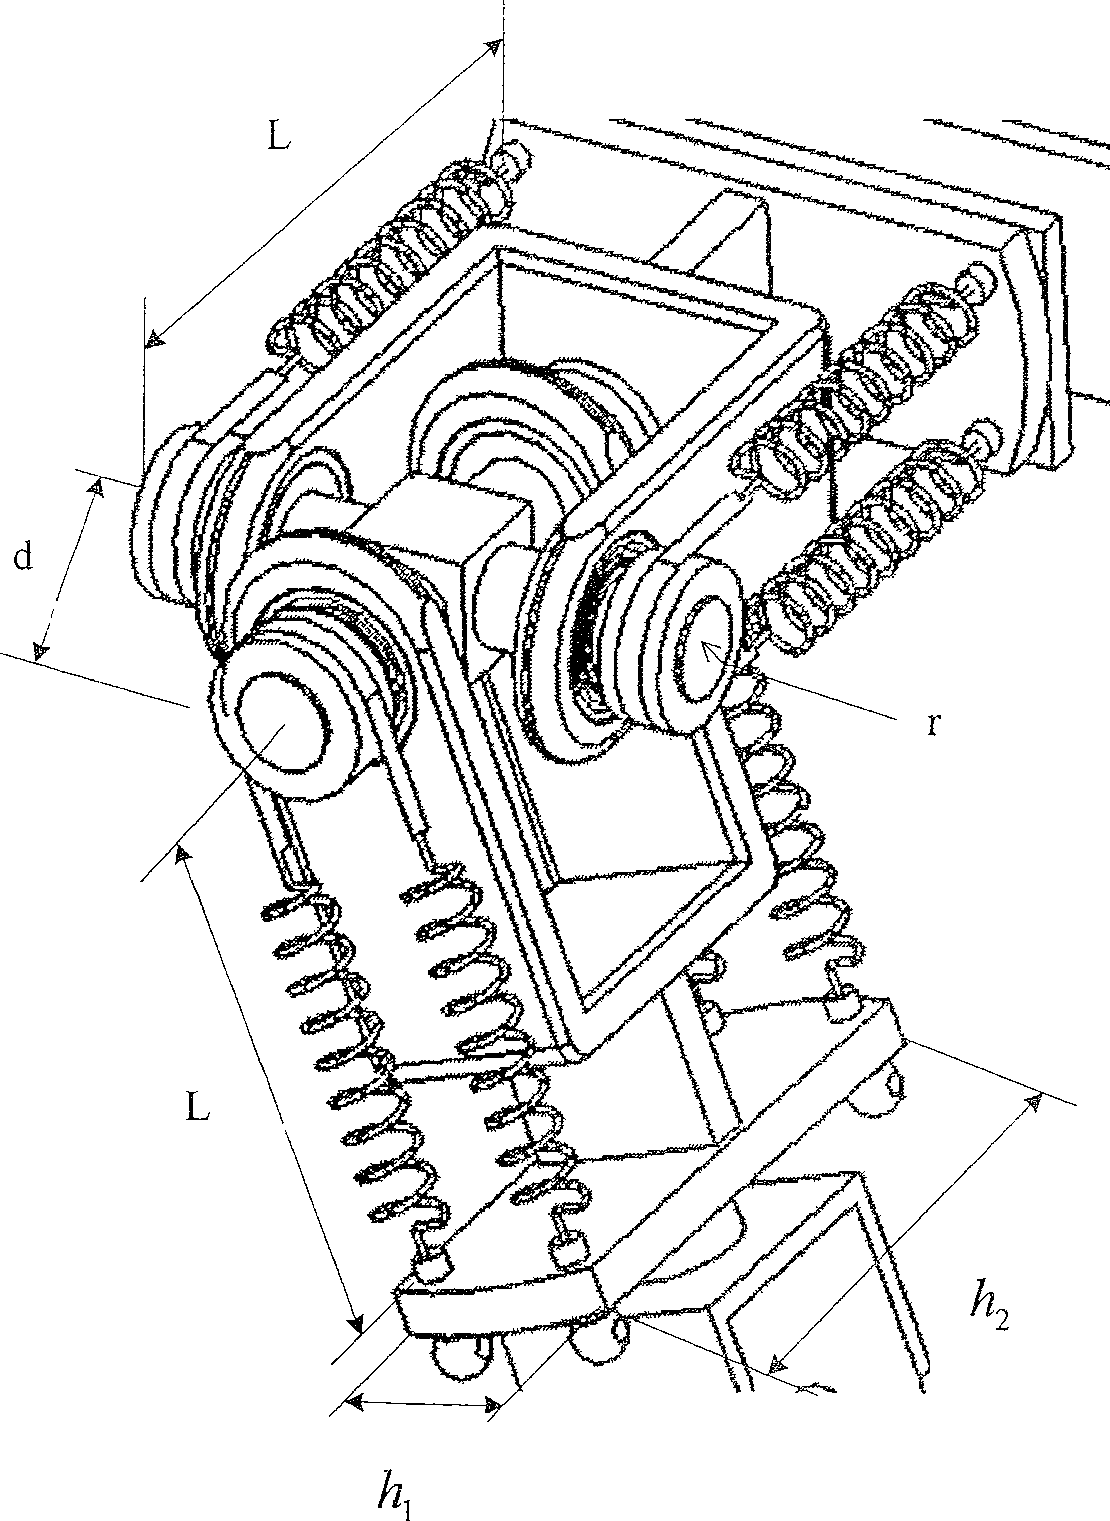 Driving joint for cross axle type robot based on shape memory alloy